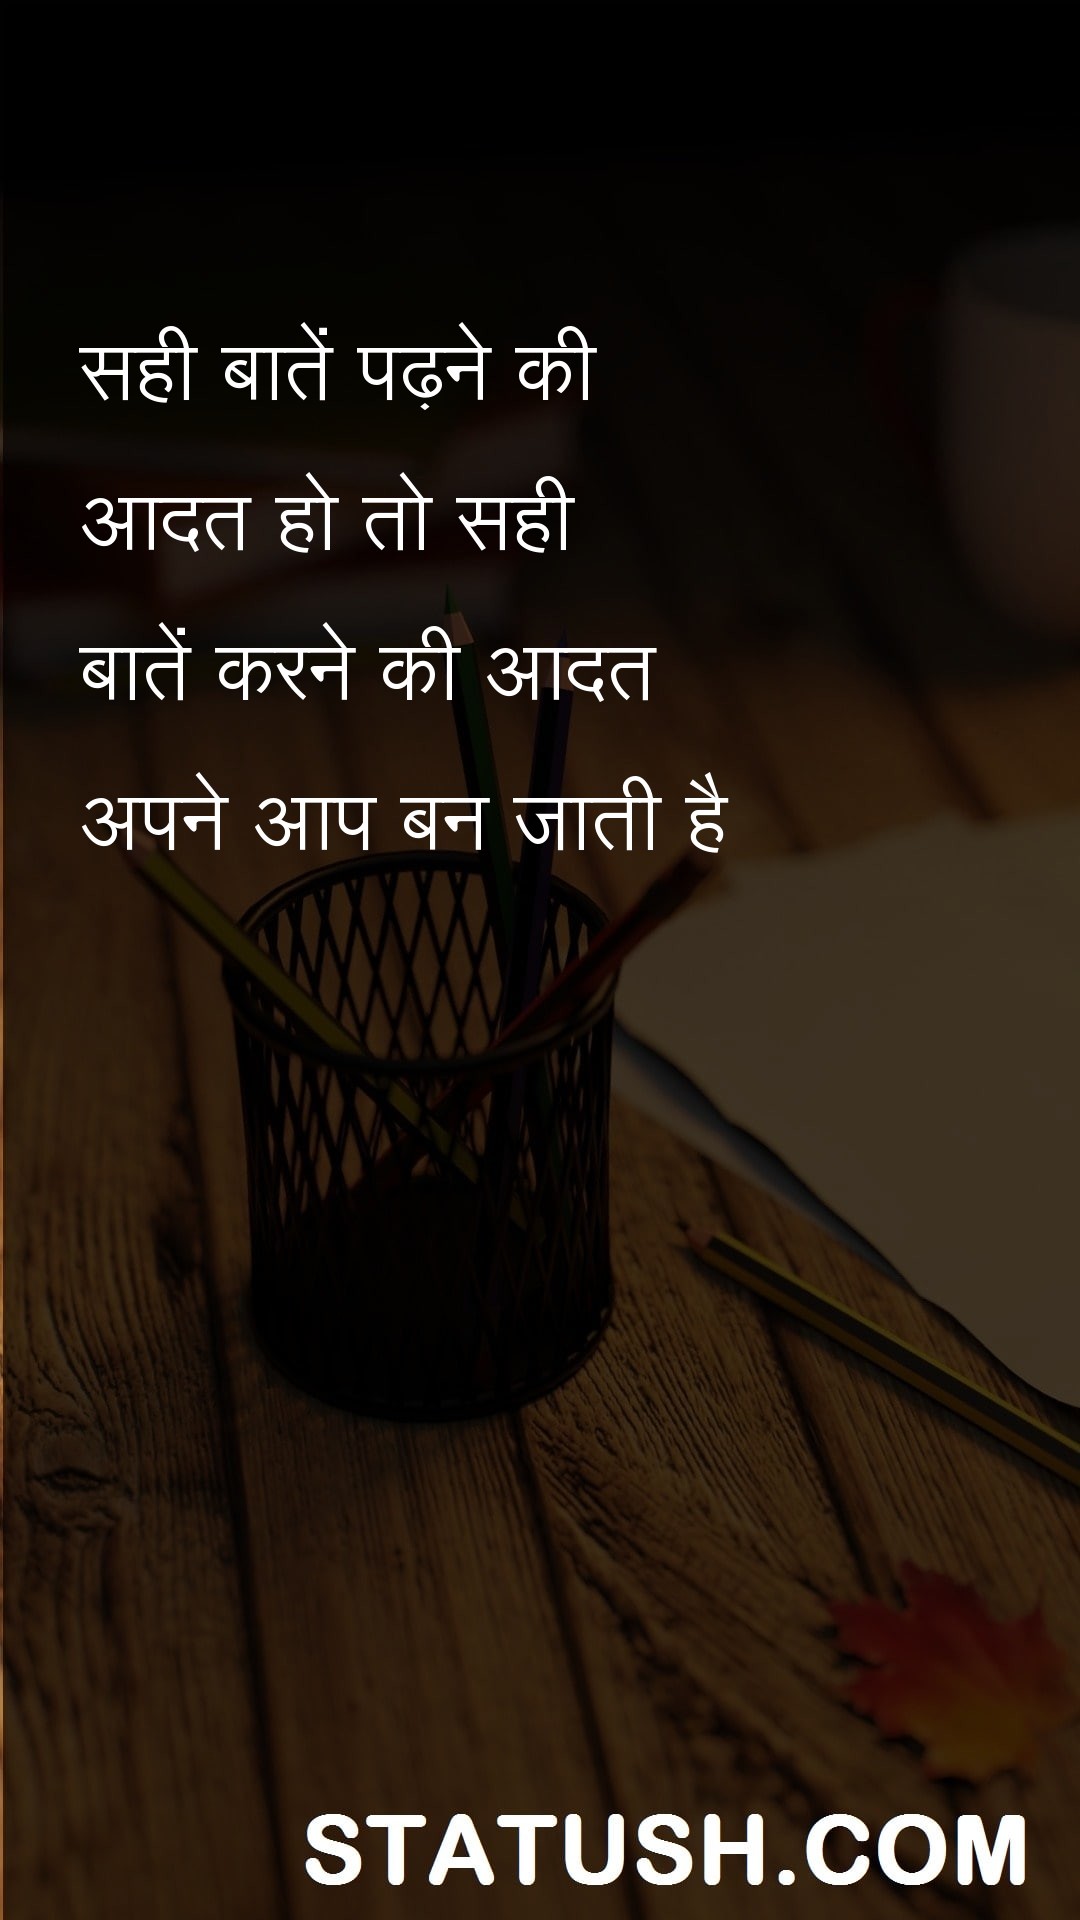 if there is a habit of reading the right things - Hindi Quotes at statush.com